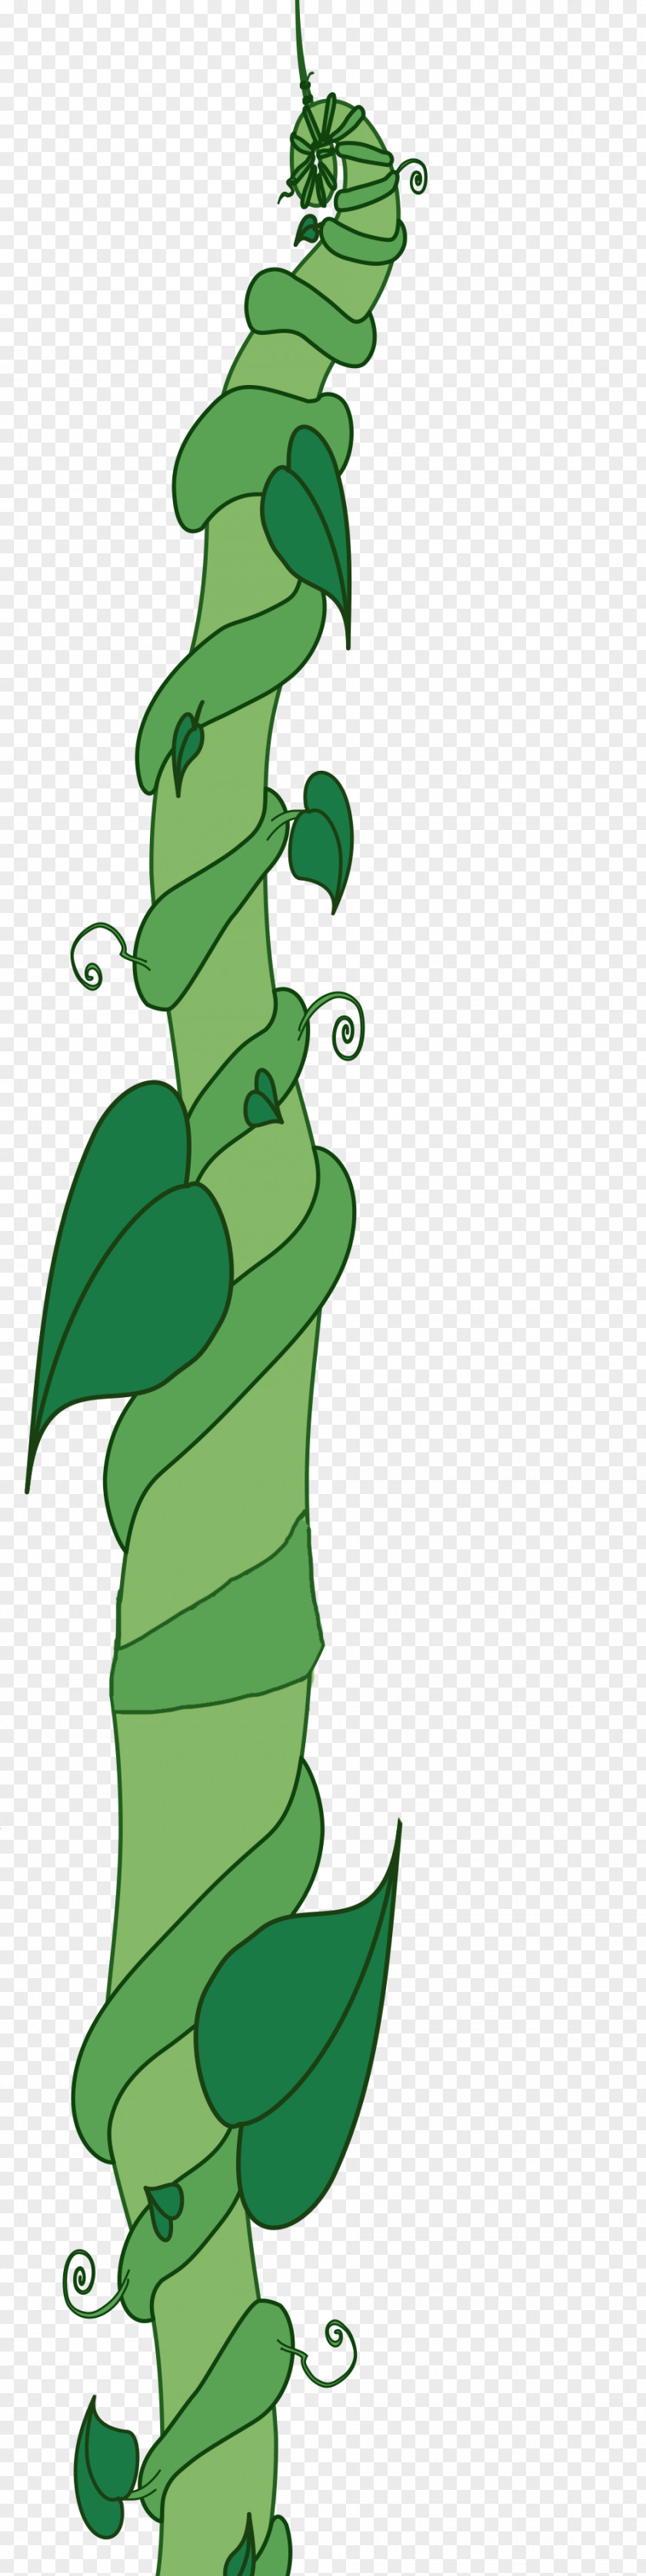 Jack And The Beanstalk Clip Art PNG